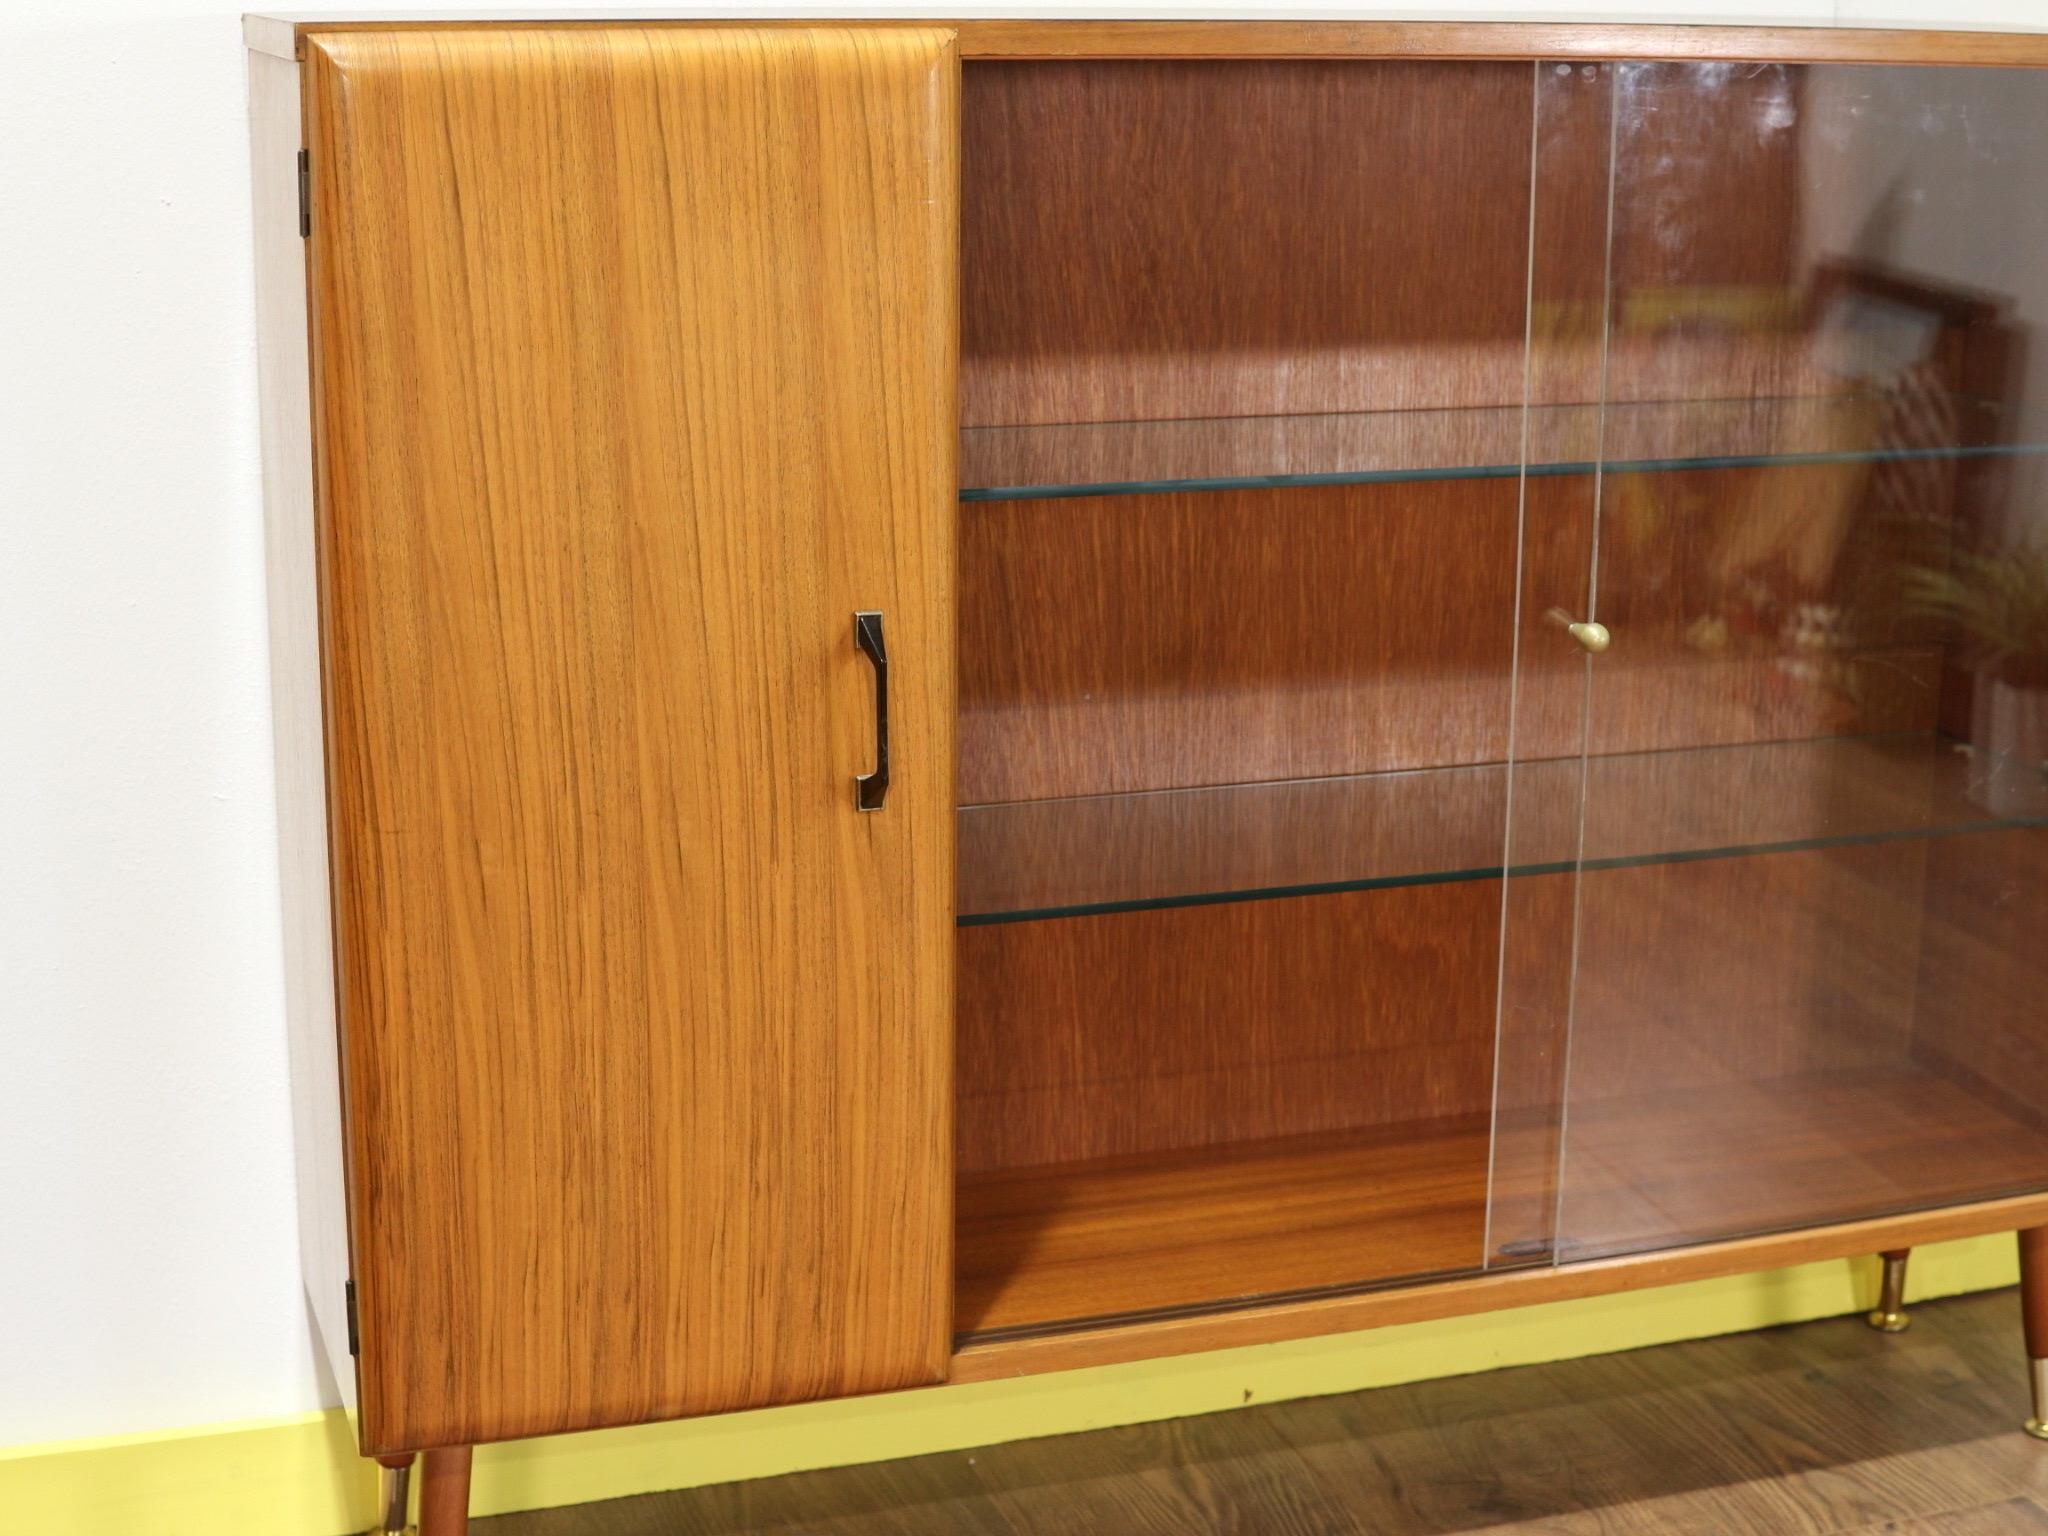 A beautiful mid-century china display cabinet made by Turnbridge of London. This gorgeous cabinet sat on atomic legs is a real head turner. With sliding doors and glass shelves there is plenty of display space